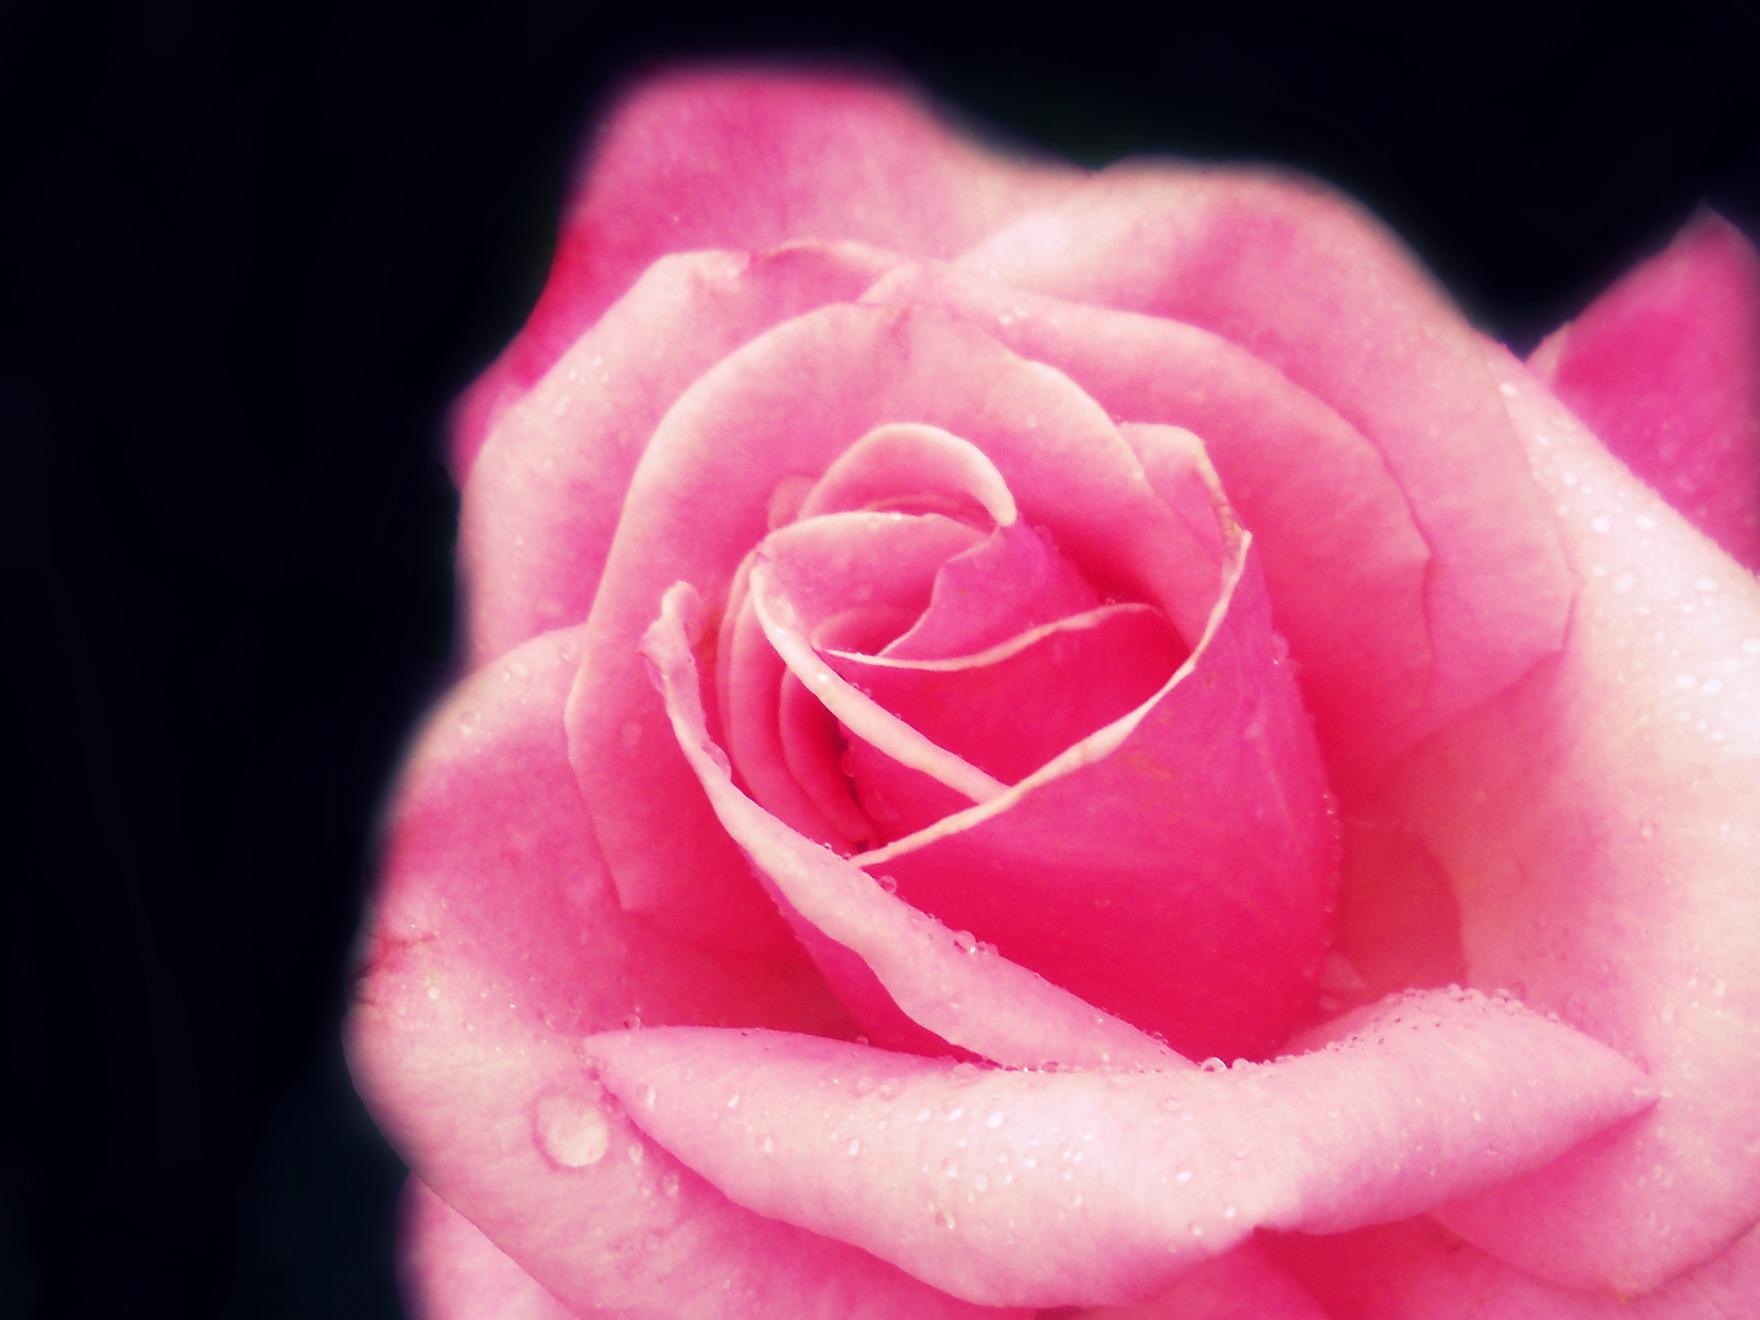 ROSE BY ANOTHER NAME WALLPAPER - (#125497) - HD Wallpapers ...